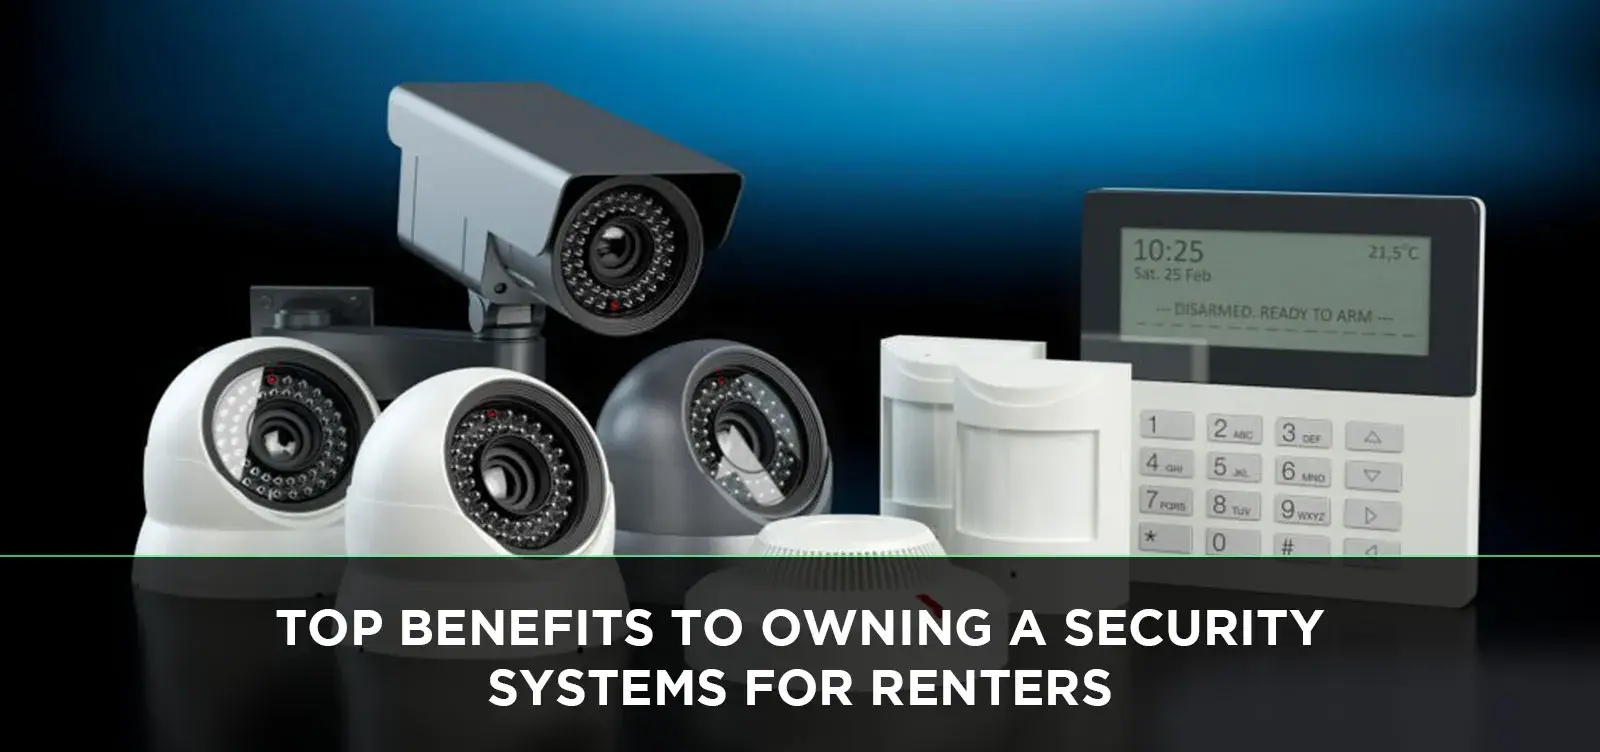 Top Benefits to Owning a Security Systems for Renters